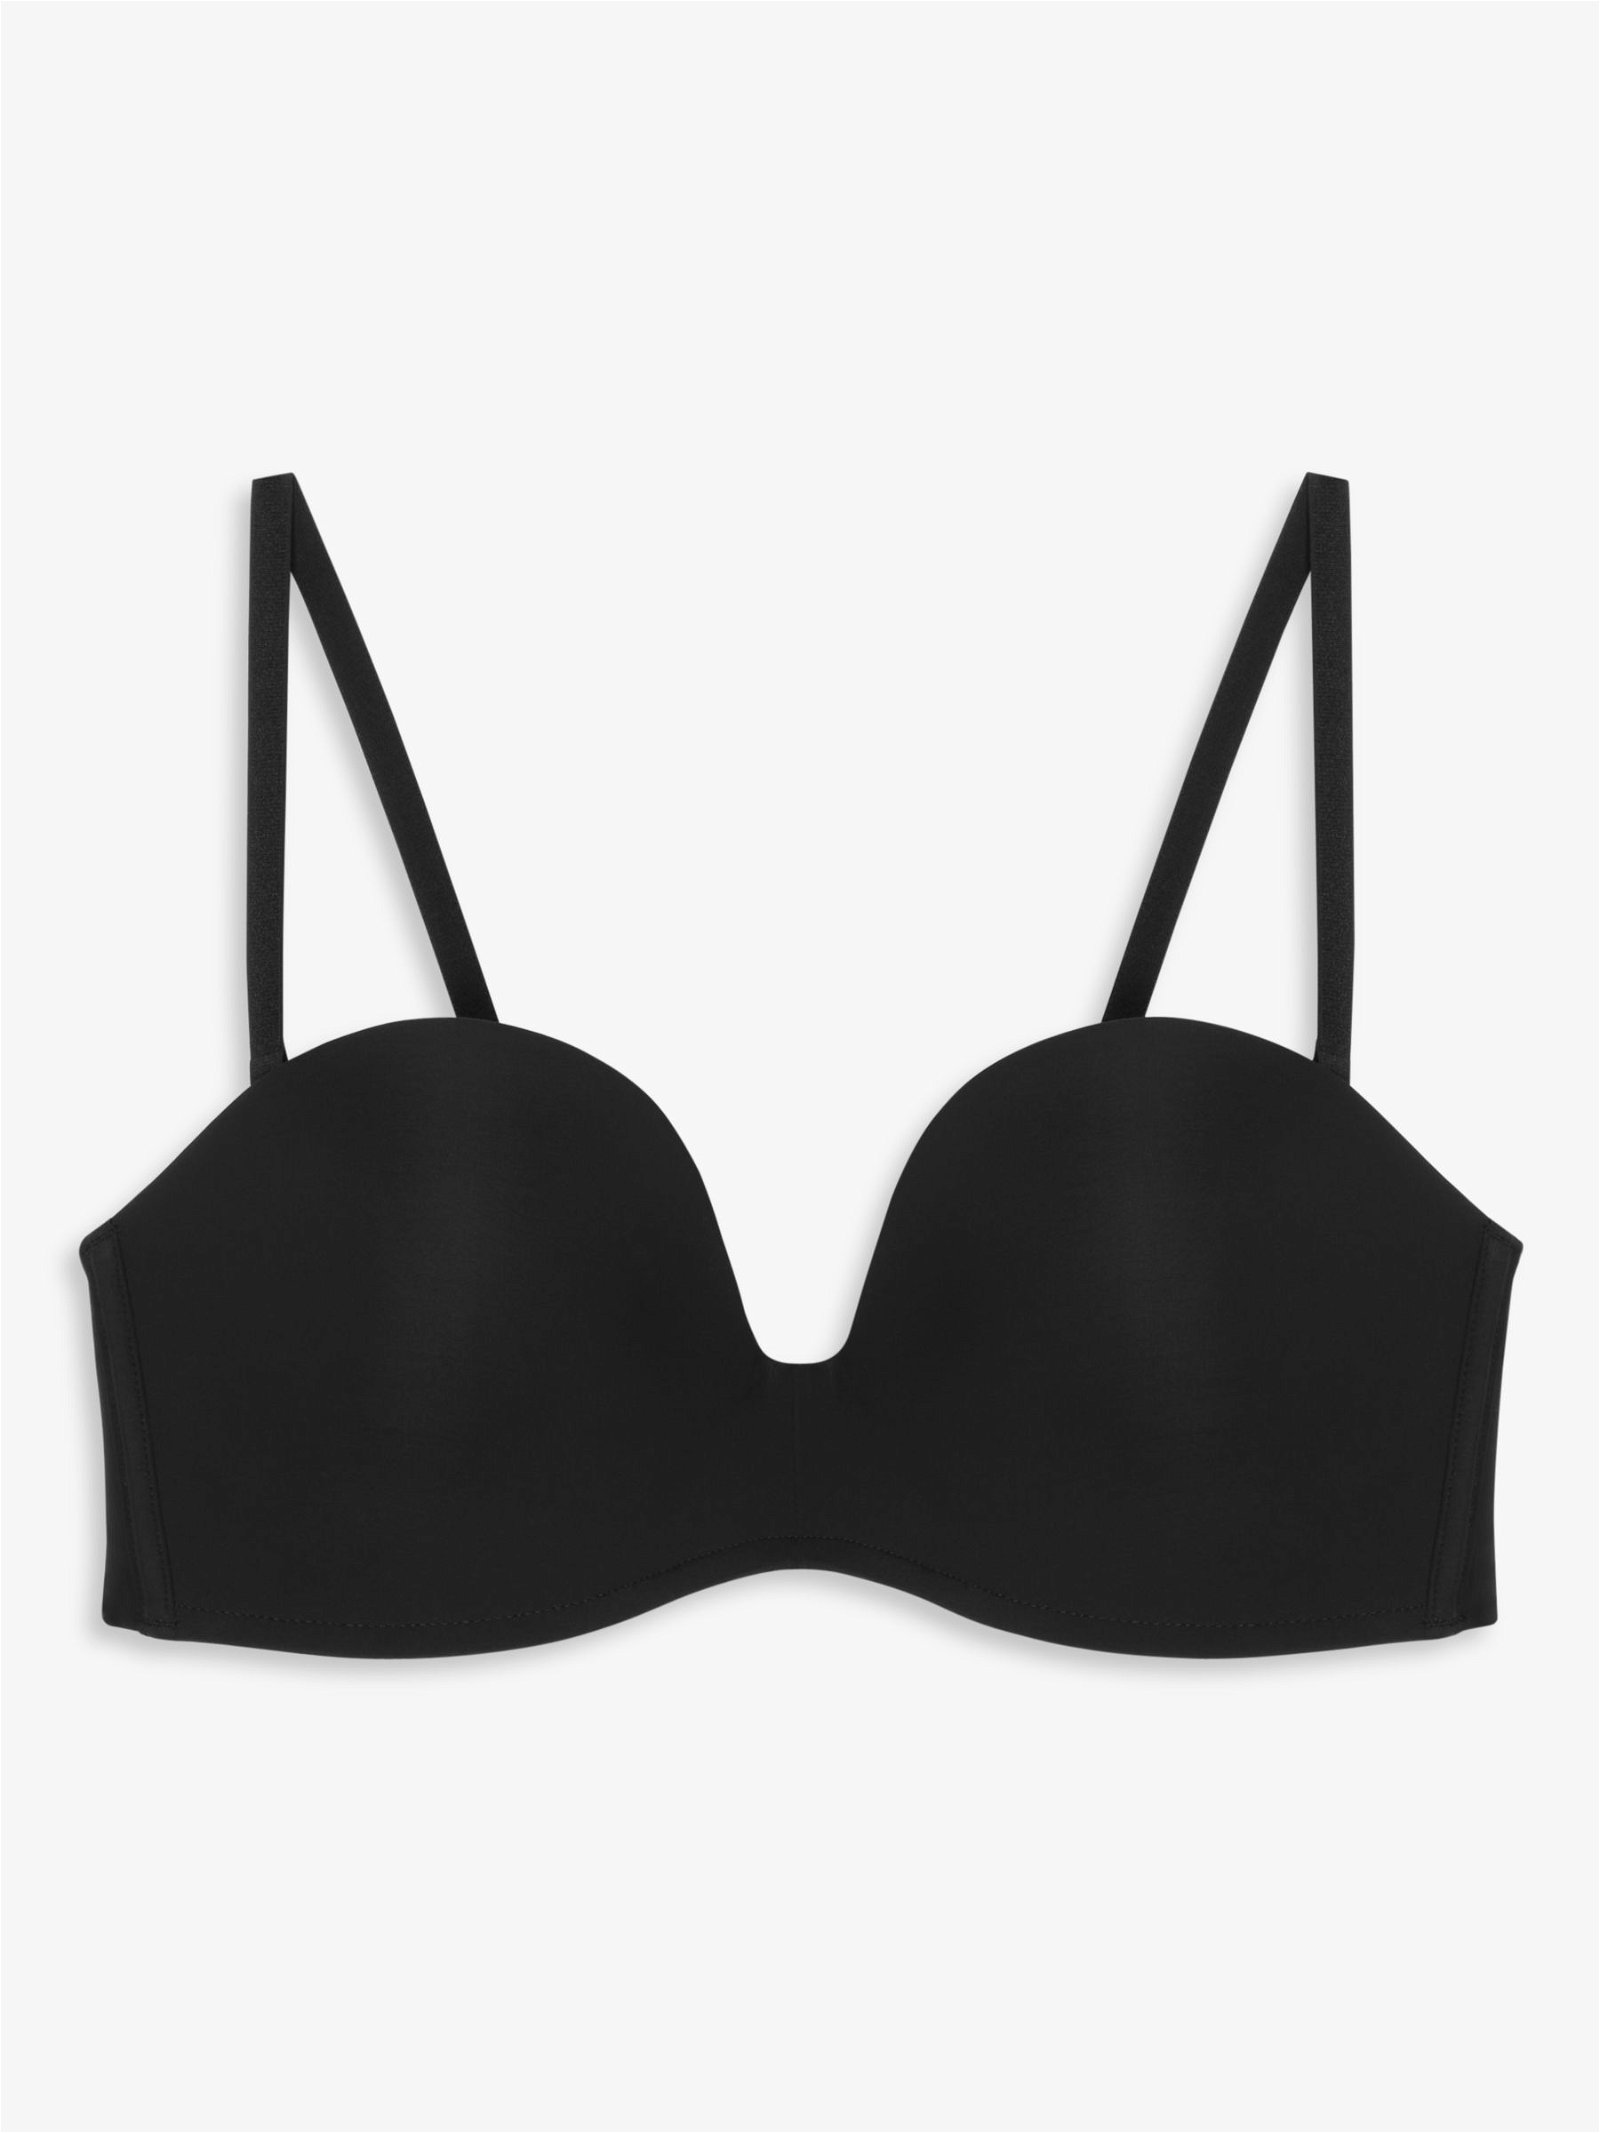 John Lewis AND/OR Coralie Balcony Bra, Full Support Black/Neon Size 32B  BNWT